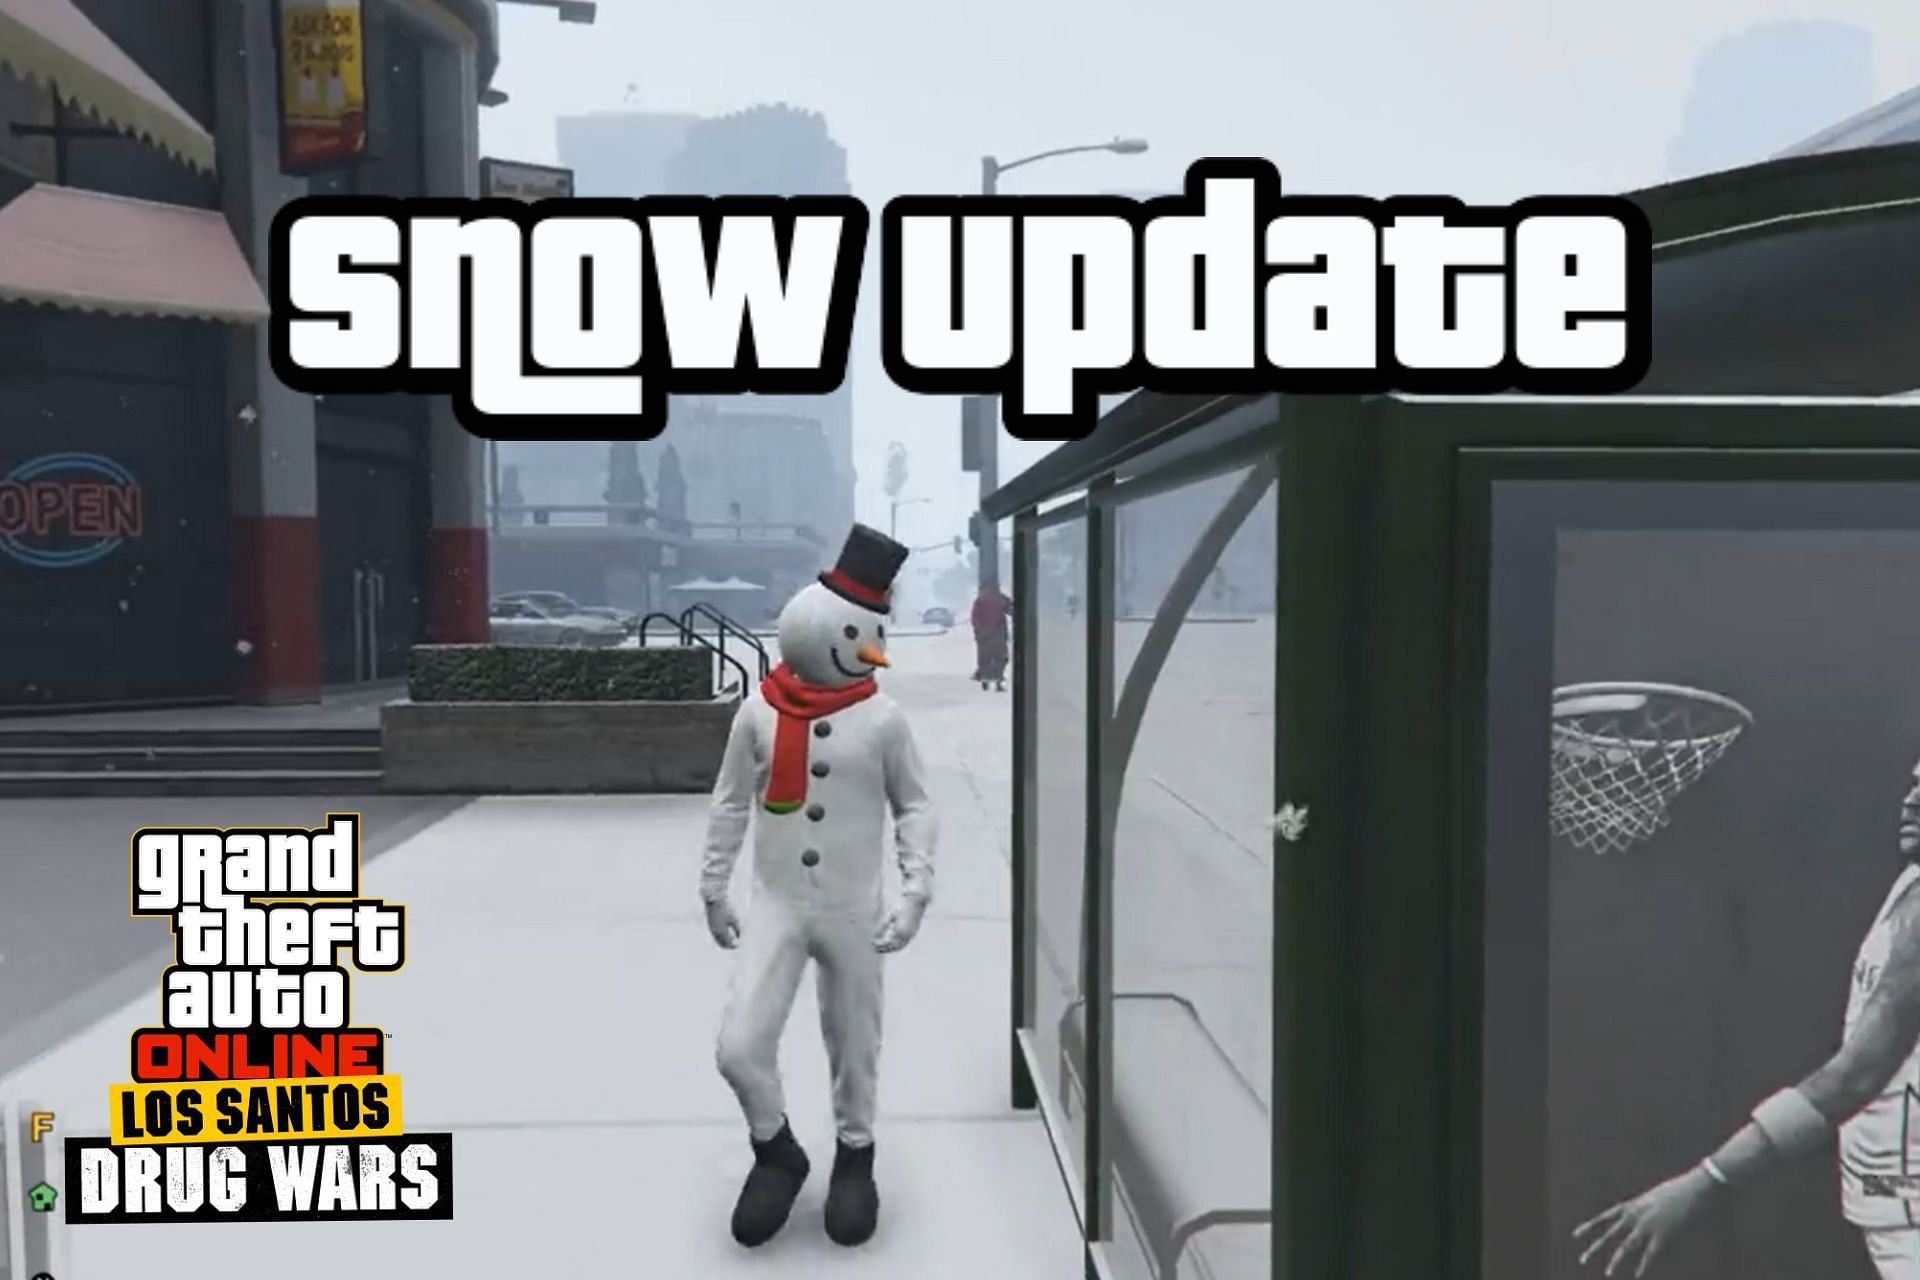 The snow season is expected to arrive around next week in GTA Online (Image via TW/@Fluuffball)